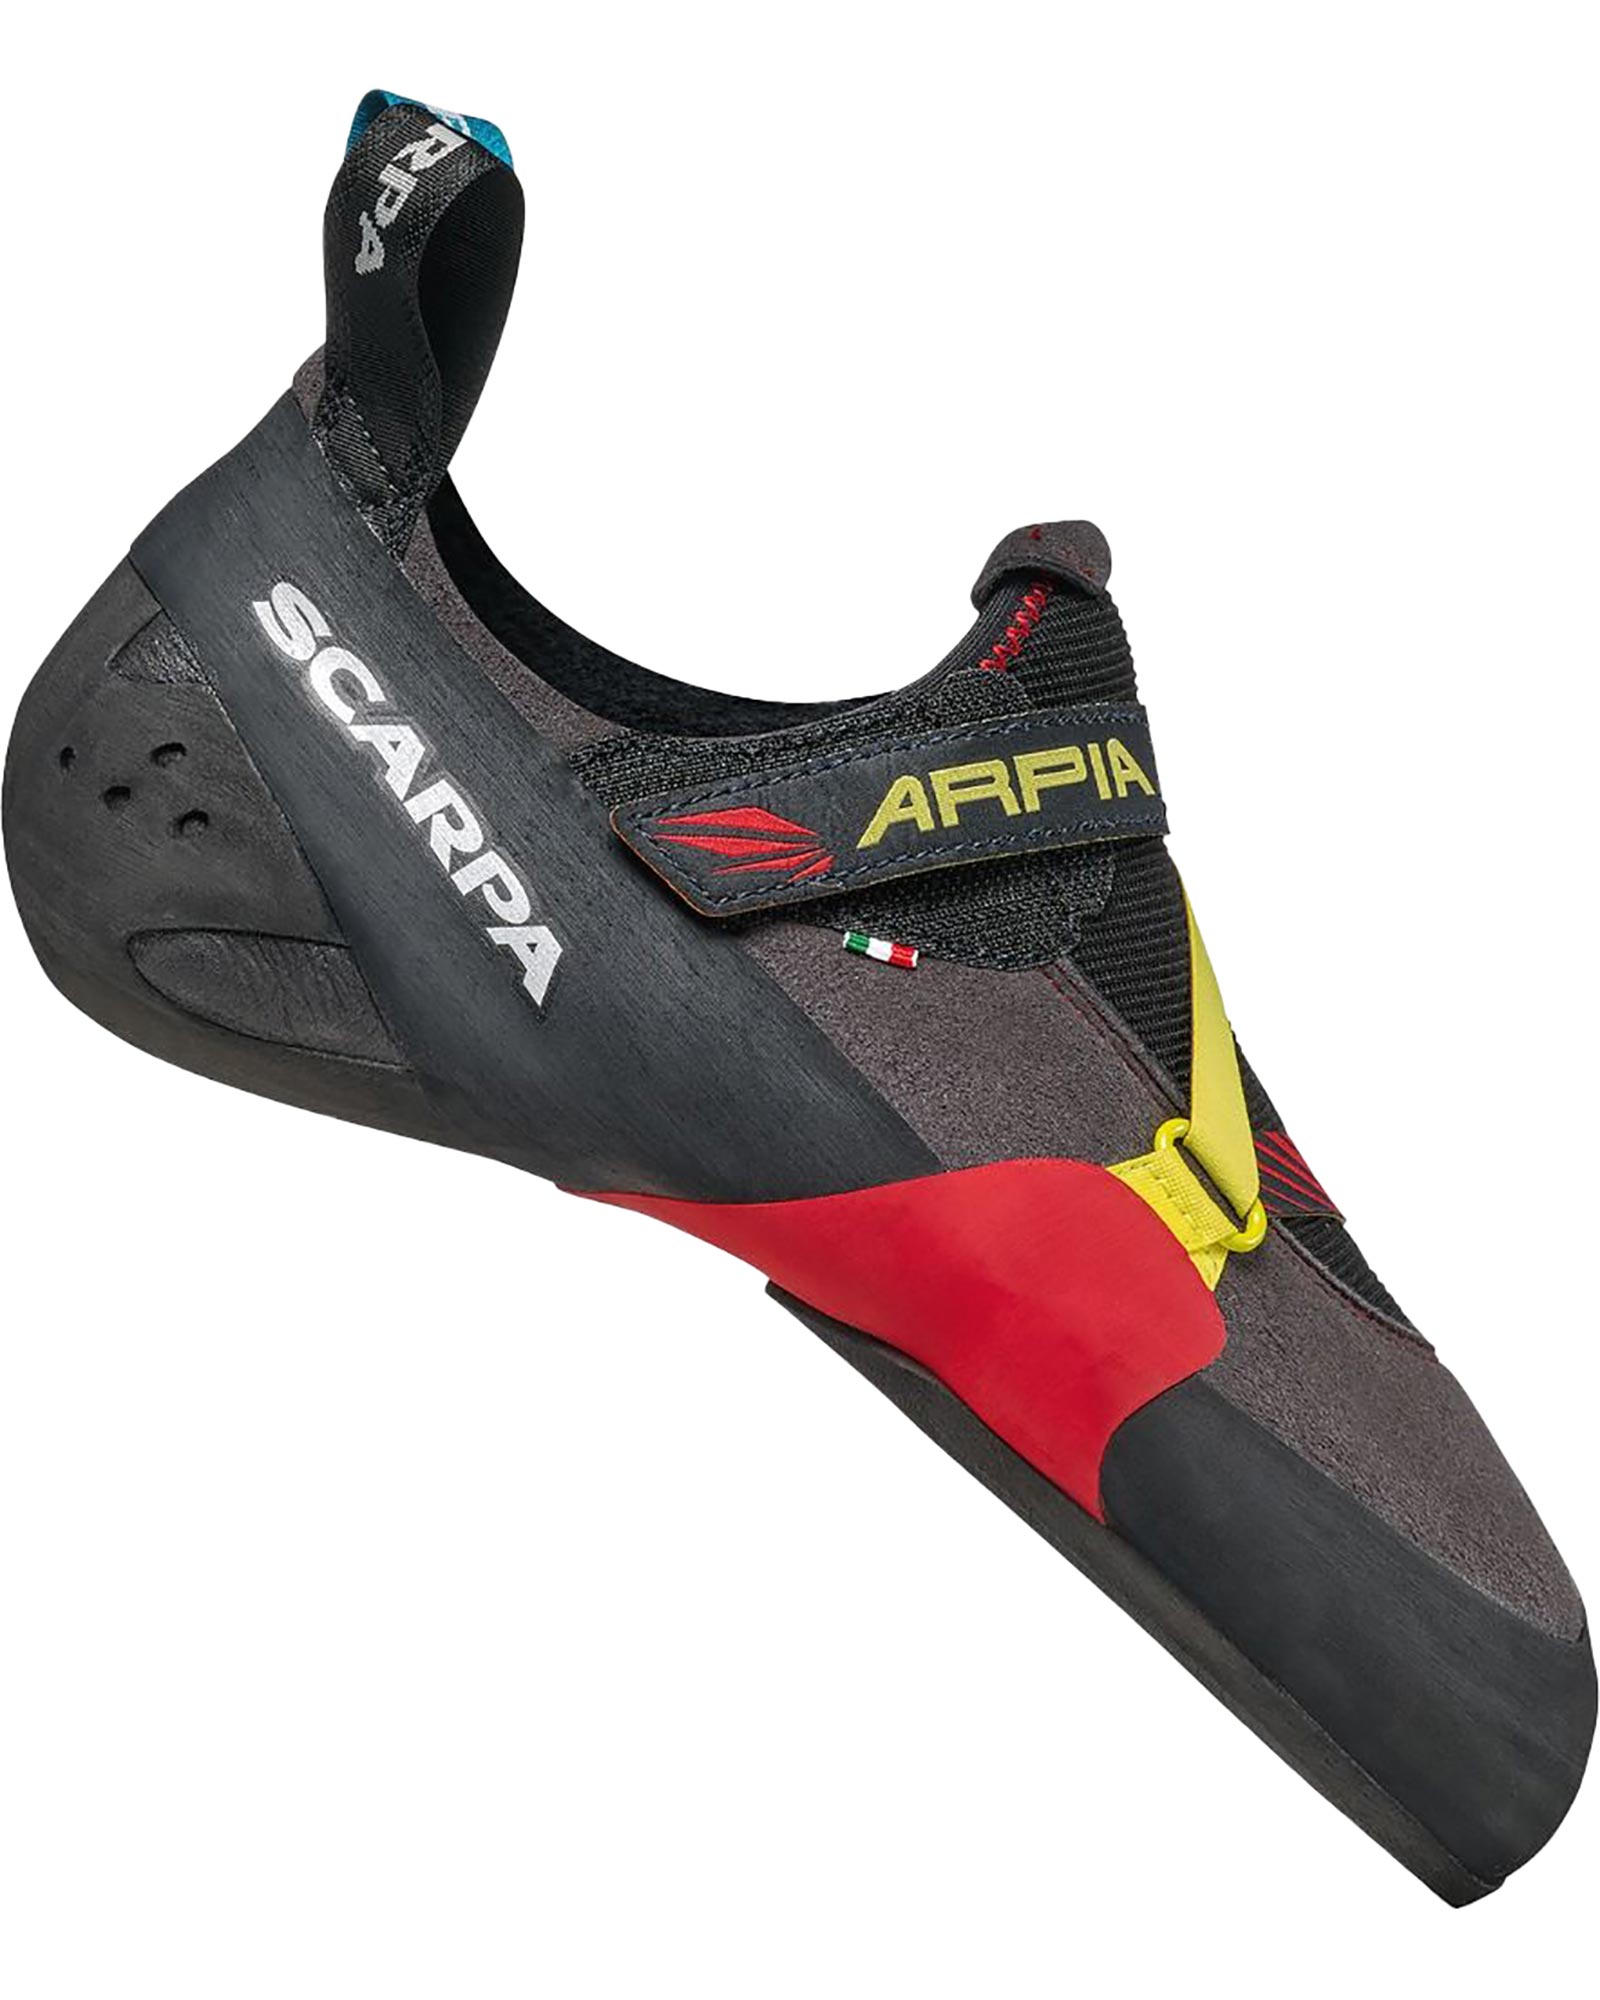 Product image of Scarpa Arpia Men's Shoes